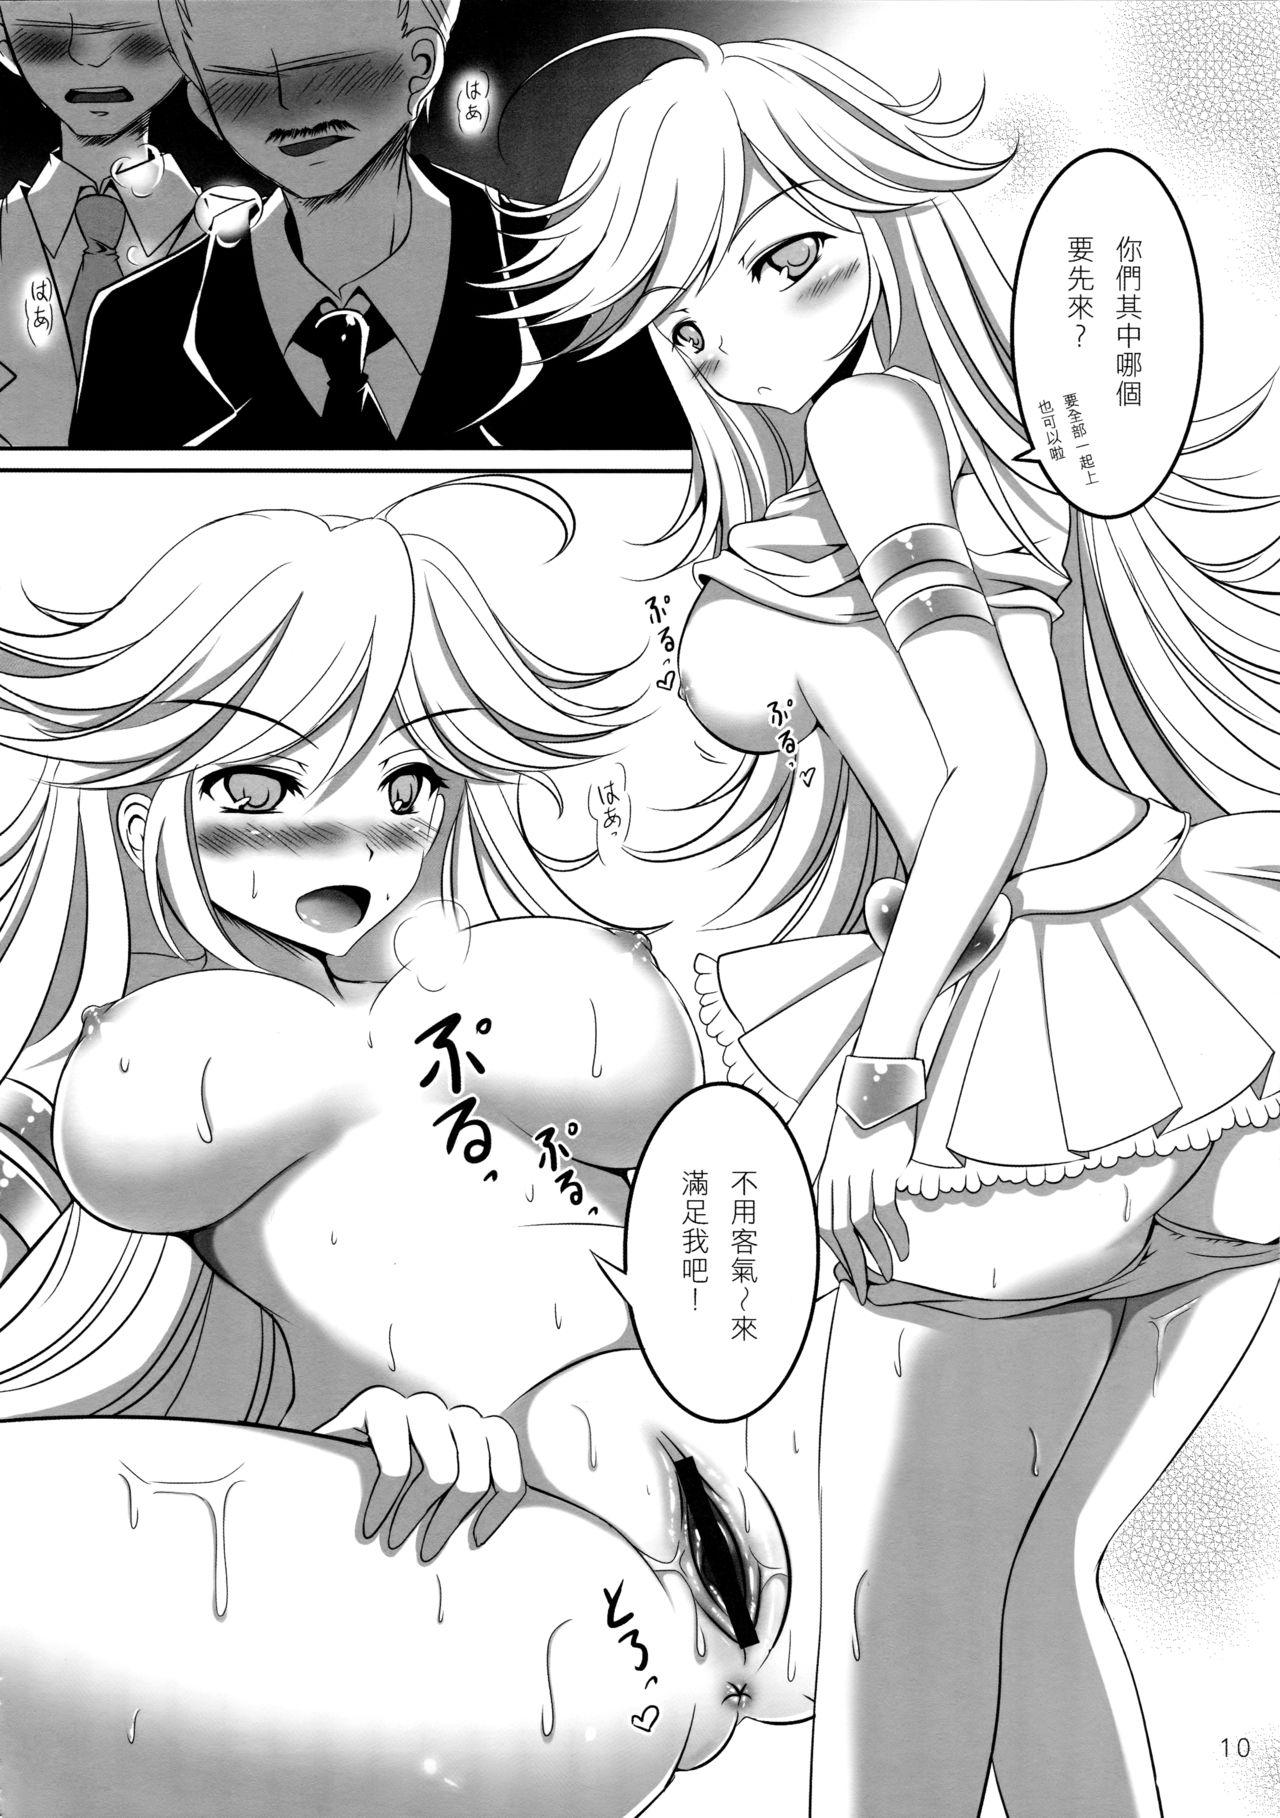 Climax Angel Bitches! - Panty and stocking with garterbelt Japanese - Page 10